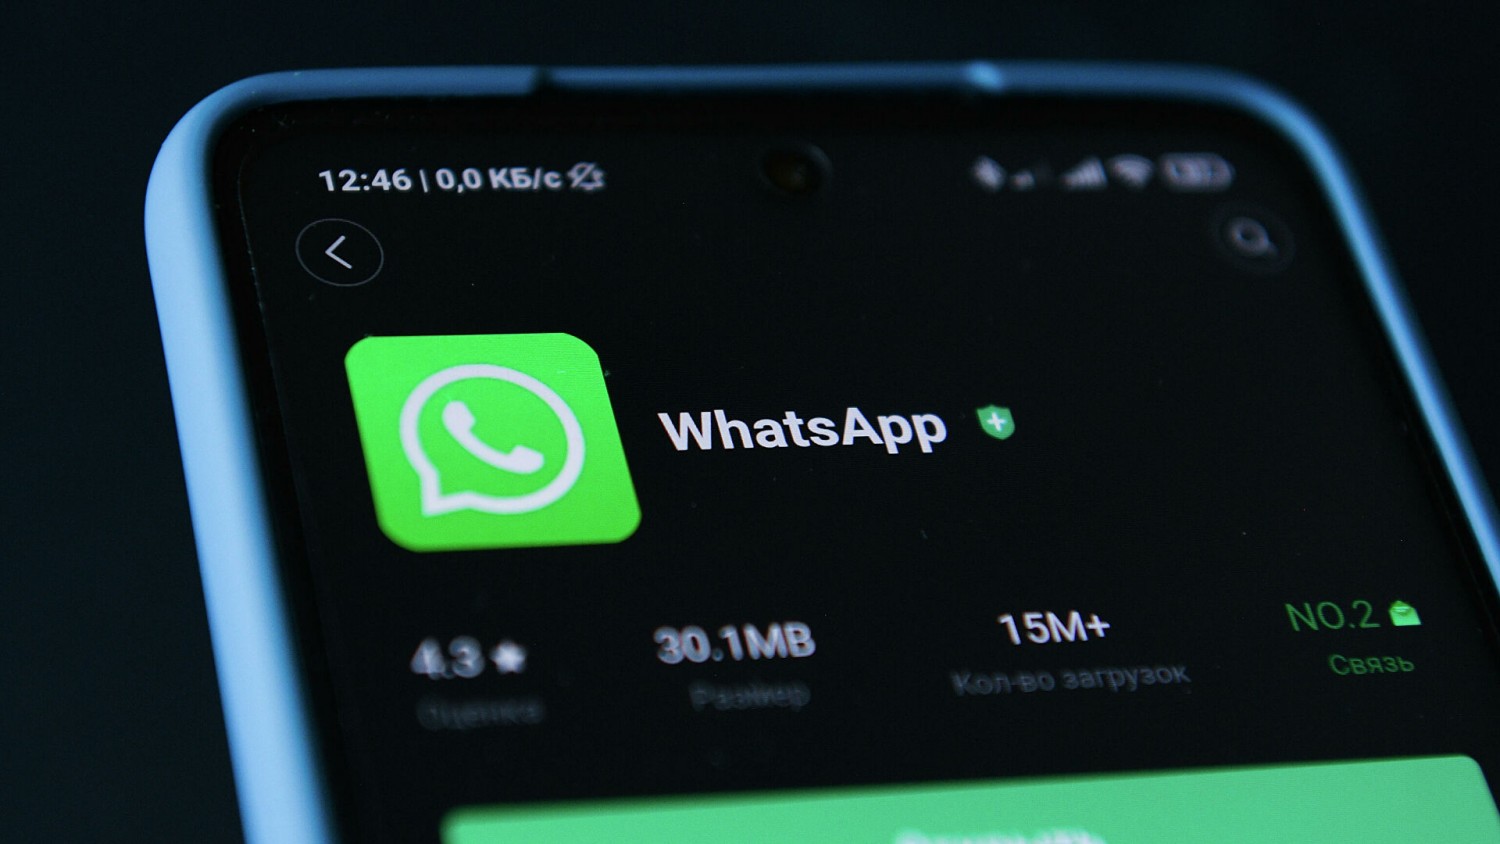 WhatsApp is committed to complying with CADE, ANPD, MPF and Senacon’s recommendations concerning the privacy policy